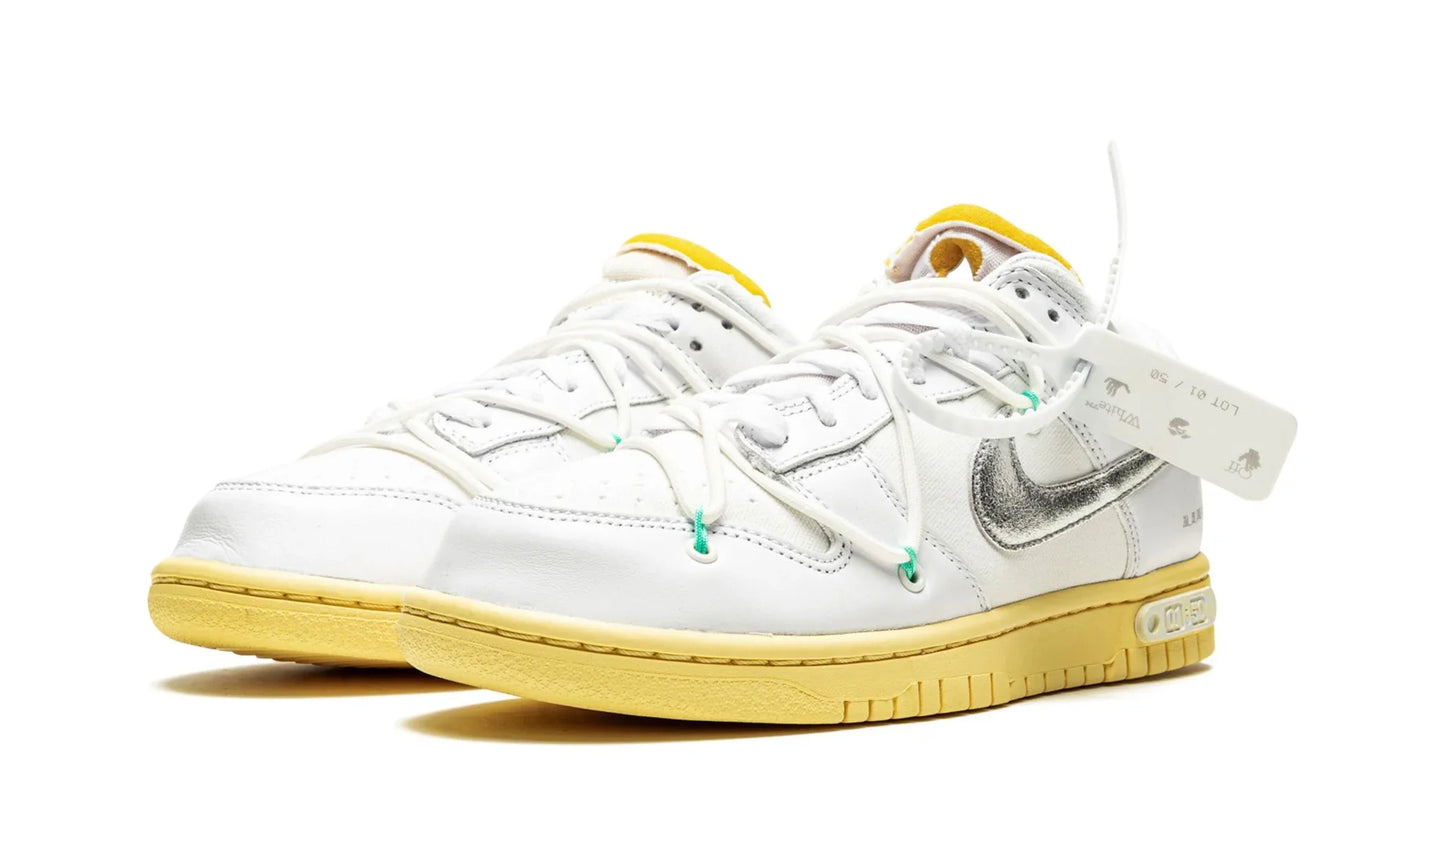 NIKE X OFF-WHITE DUNK LOW "Off-White - Lot 01"